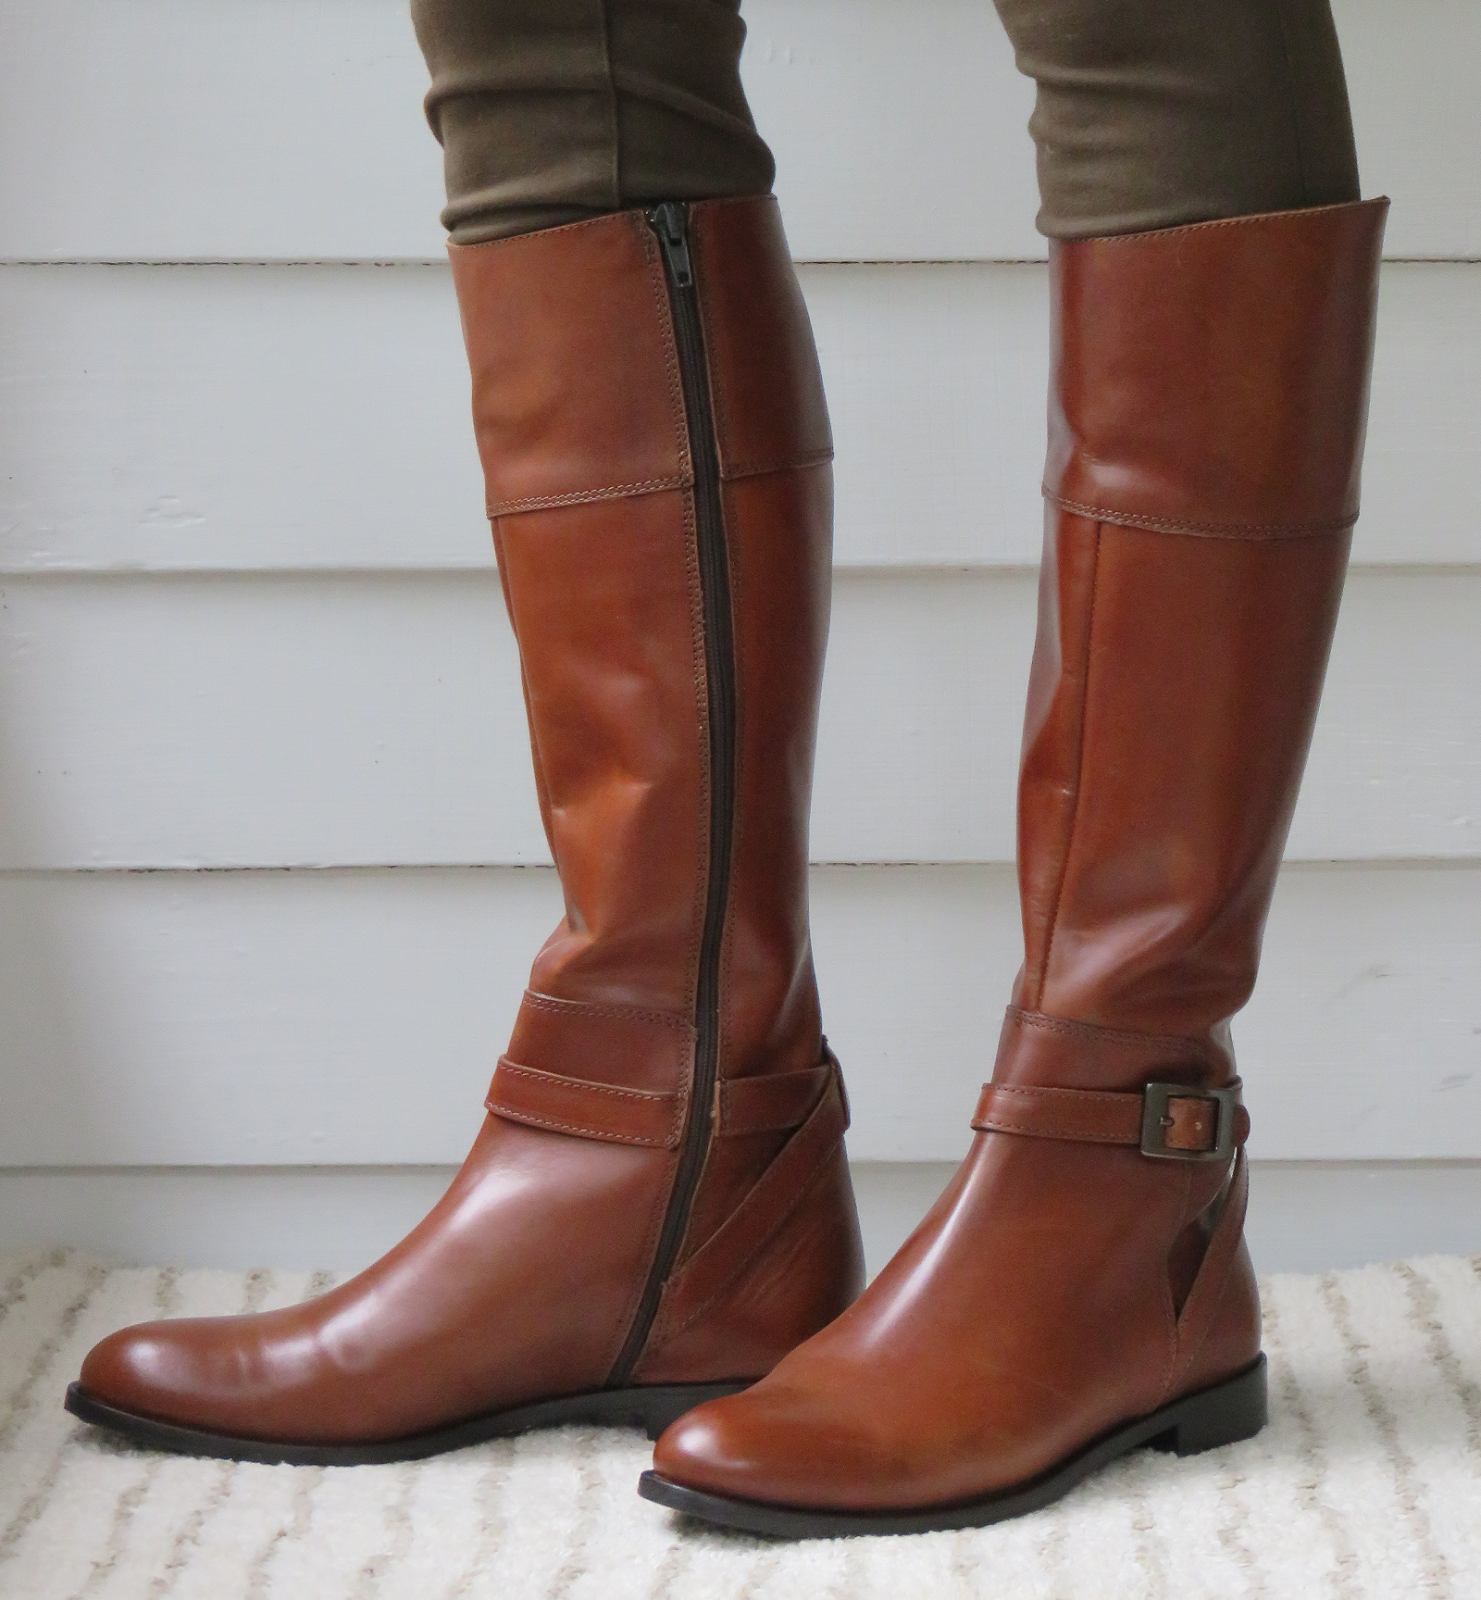 Howdy Slim! Riding Boots for Thin Calves: Take Two: Skinnycalf Rider